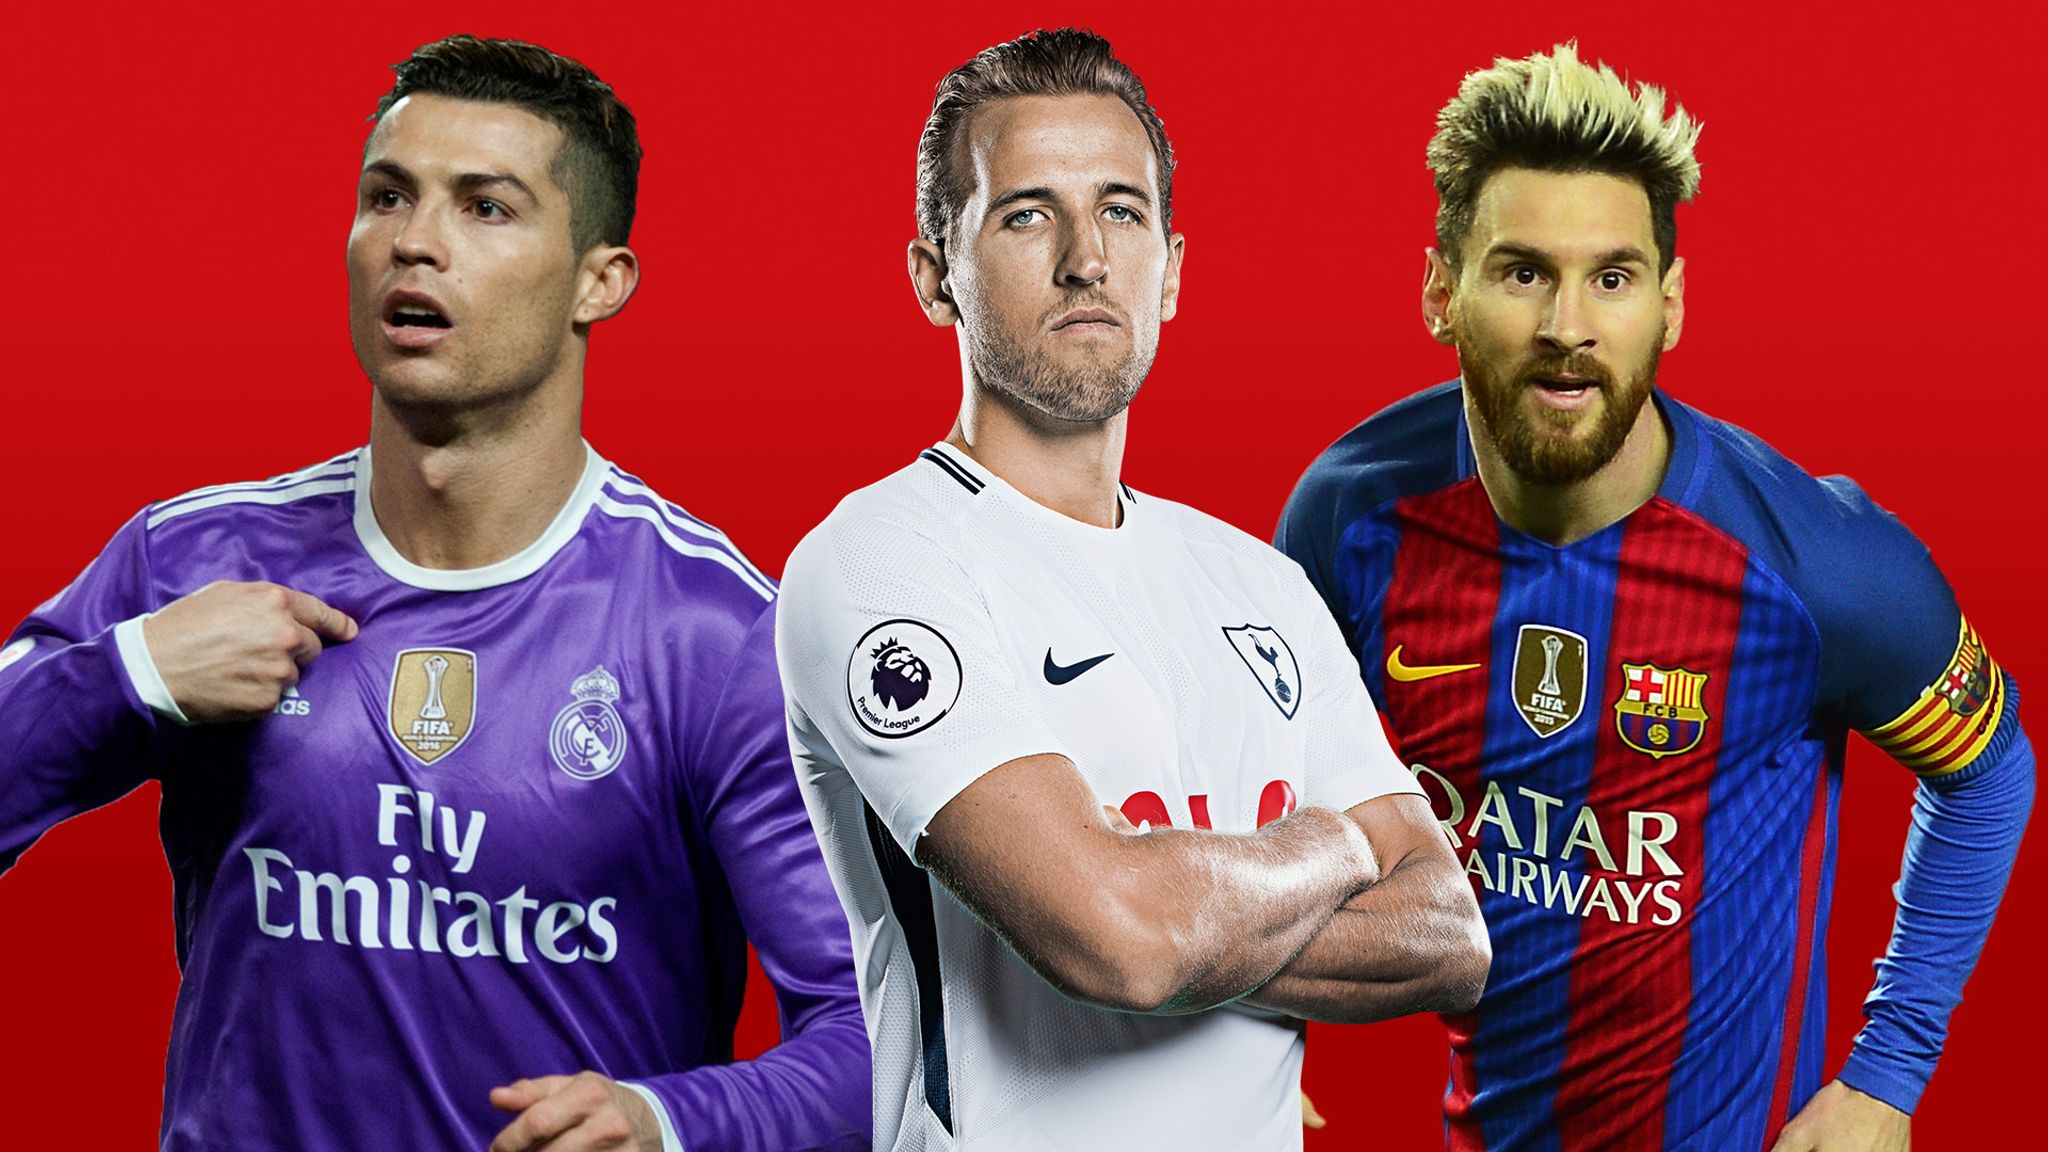 Ronaldo, Messi and Kane's NFL prospects assessed by Hall of Fame